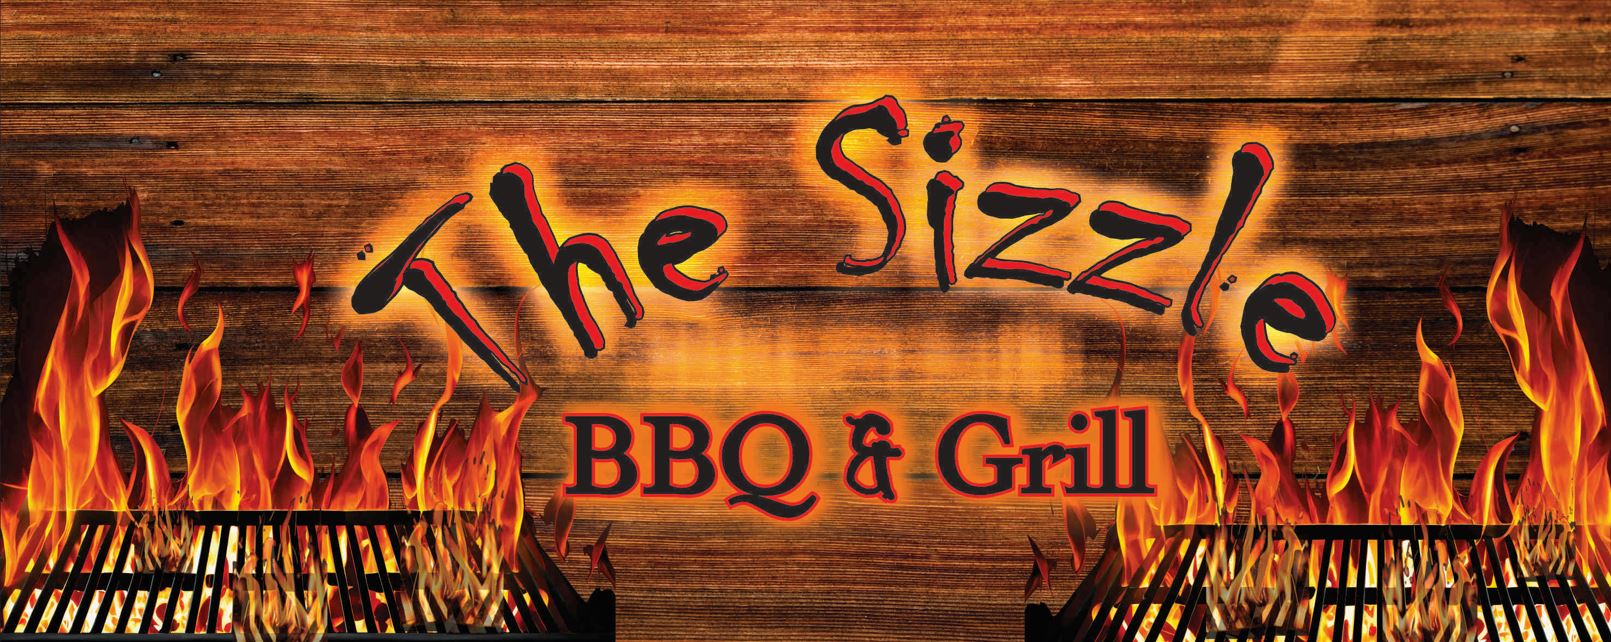 The Sizzle BBQ & Grill